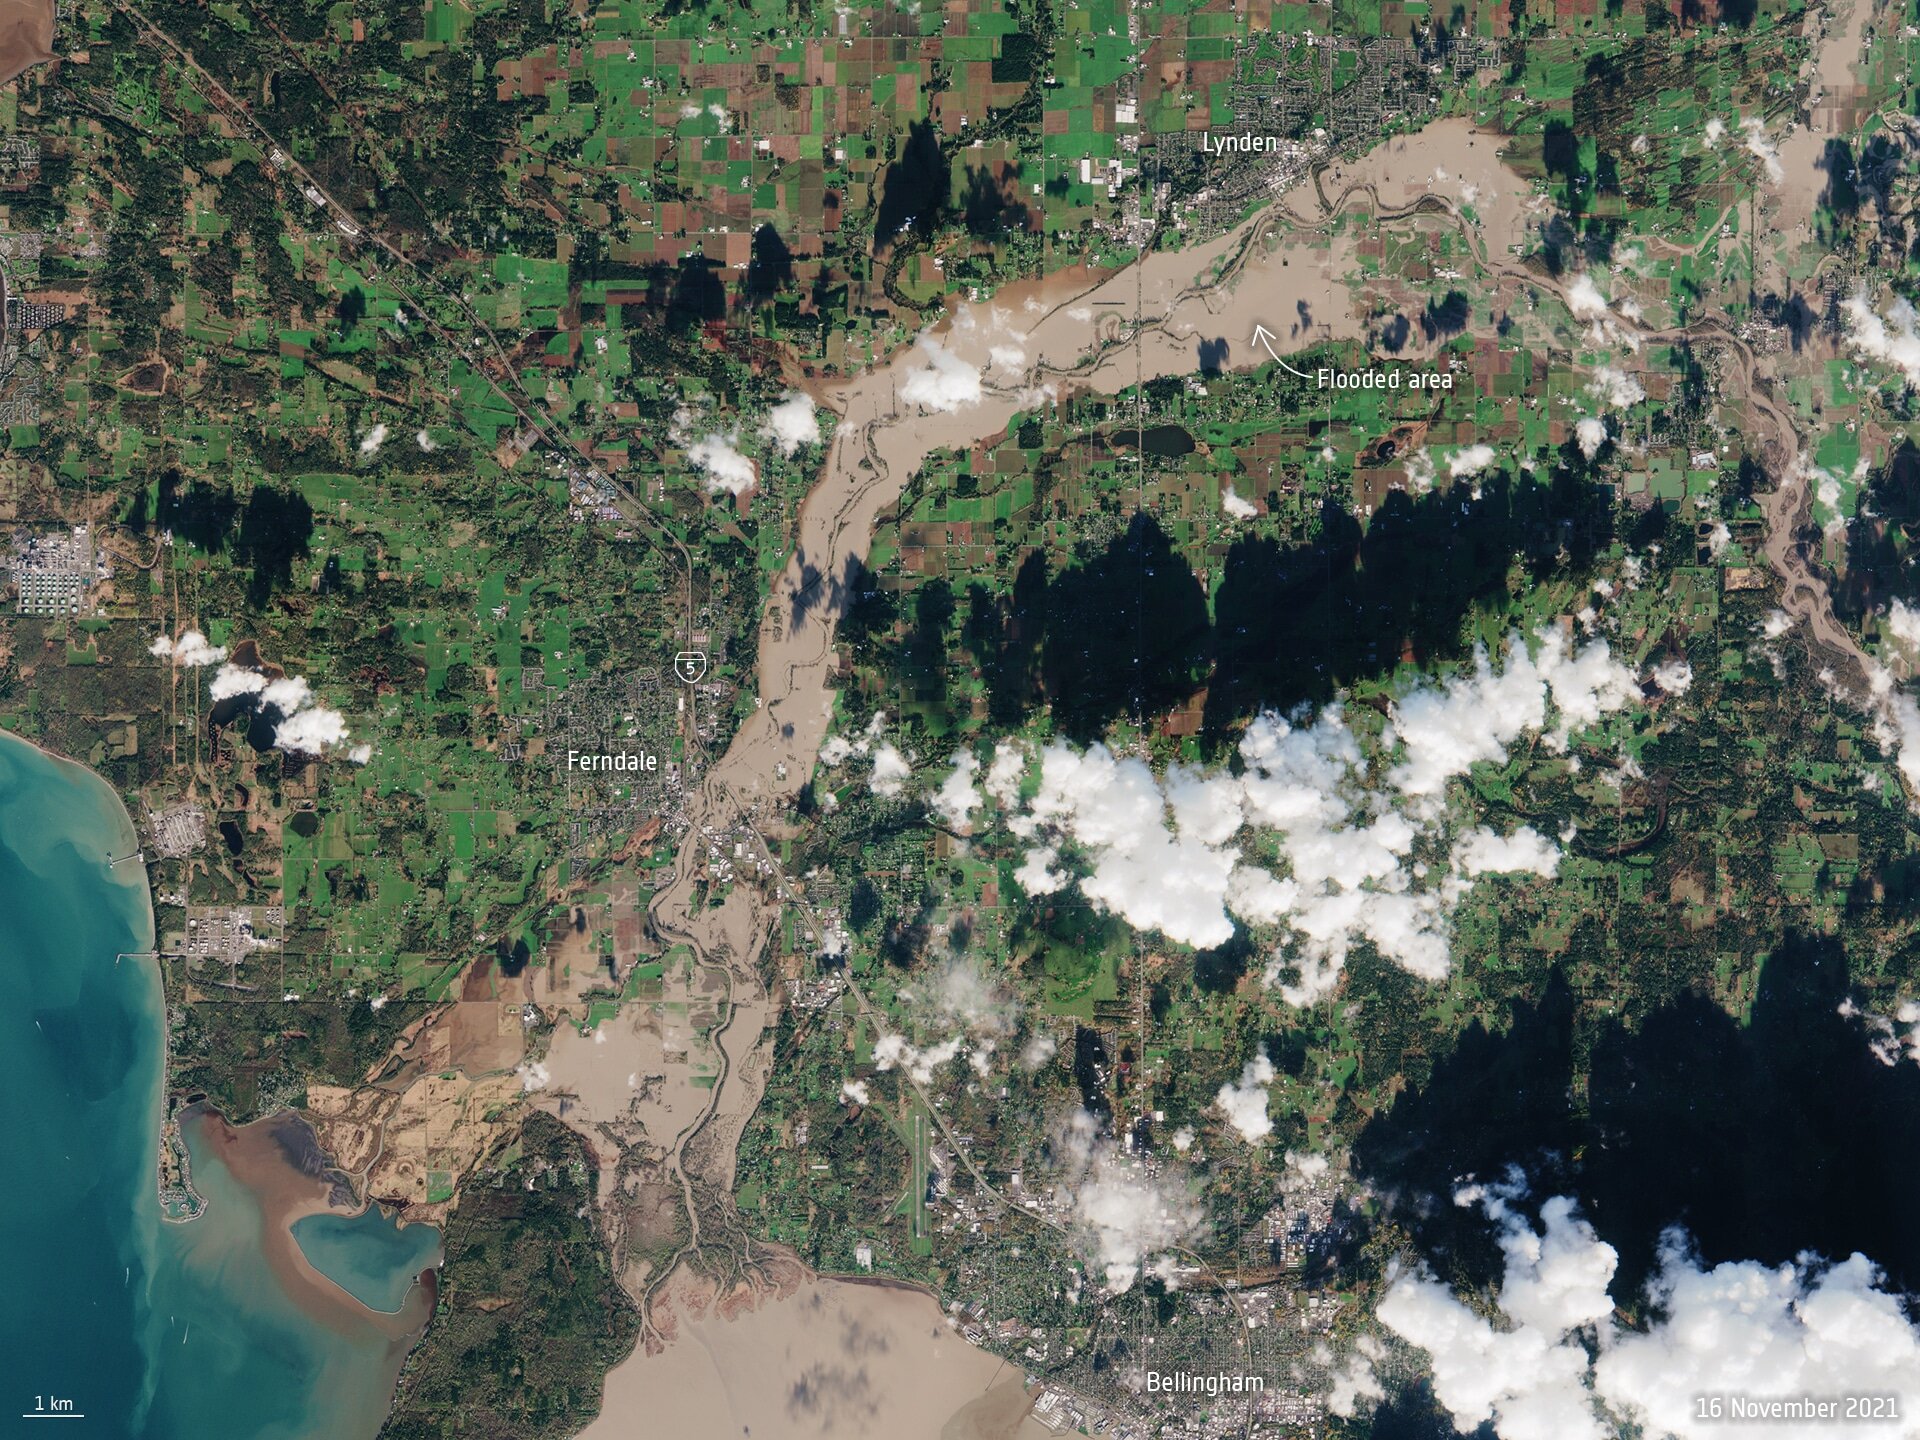 The US State of Washington is under a state of emergency following days of severe wind and rain leading to extensive flooding in parts of the state. Different satellites in orbit carry different instruments that can provide us with a wealth of complementary information to understand and to respond to flooding disasters.